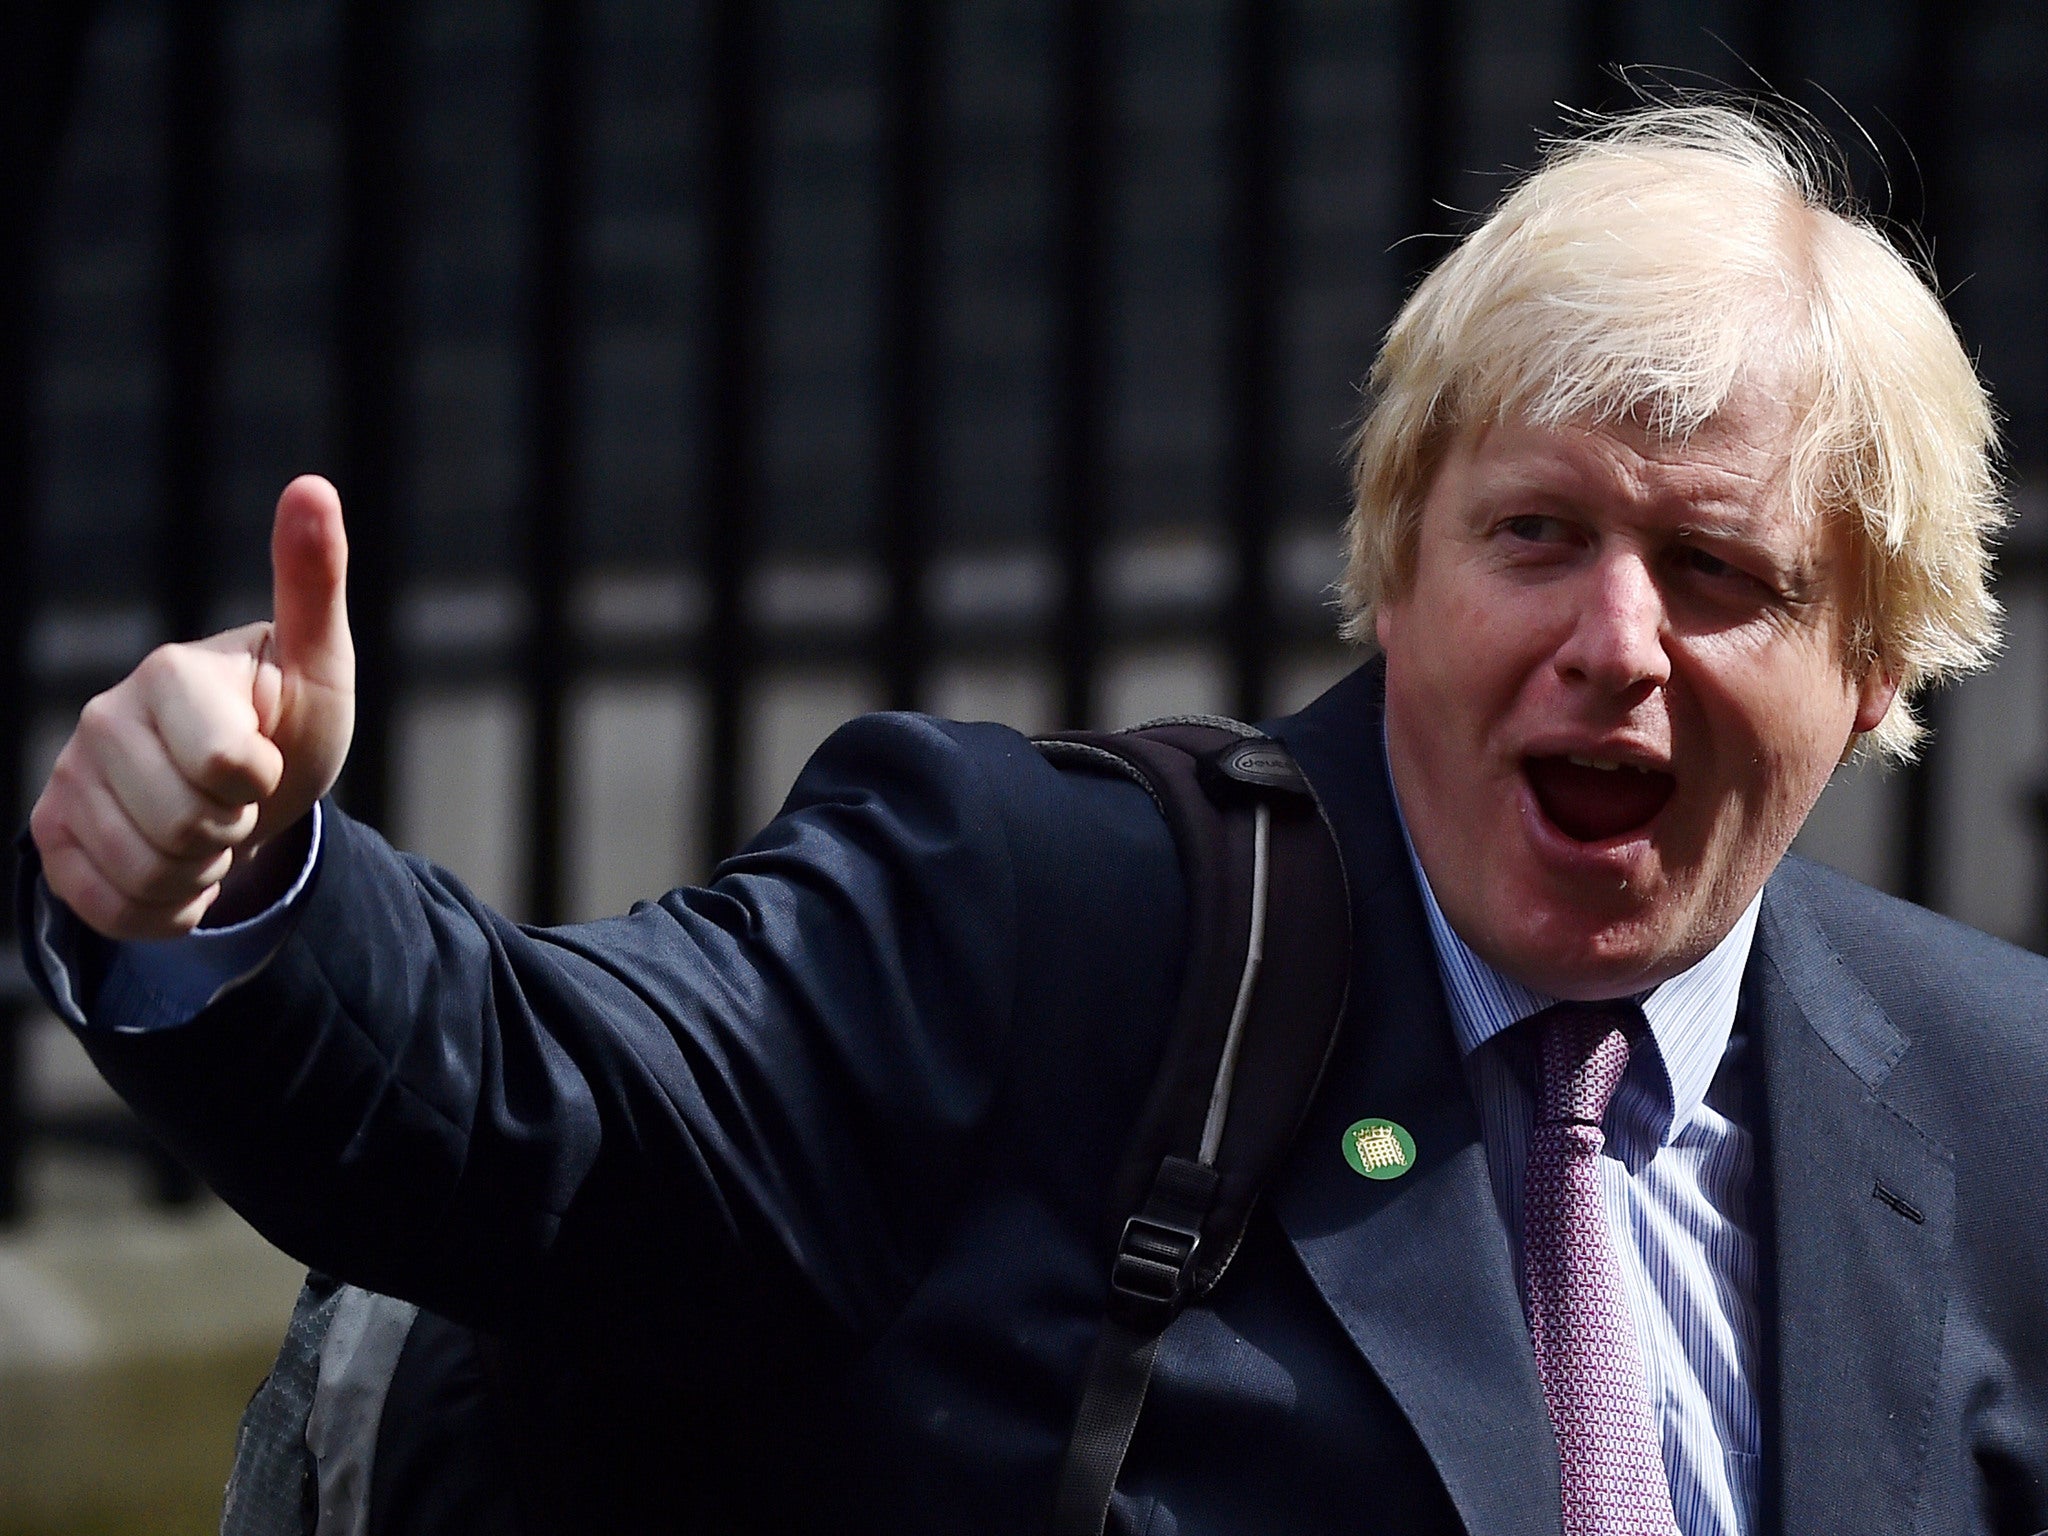 Boris Johnson, another populist who plays brilliantly to the gallery, evidently hopes the same magic stardust will help him see off his less exciting rival George Osborne when David Cameron stands down.